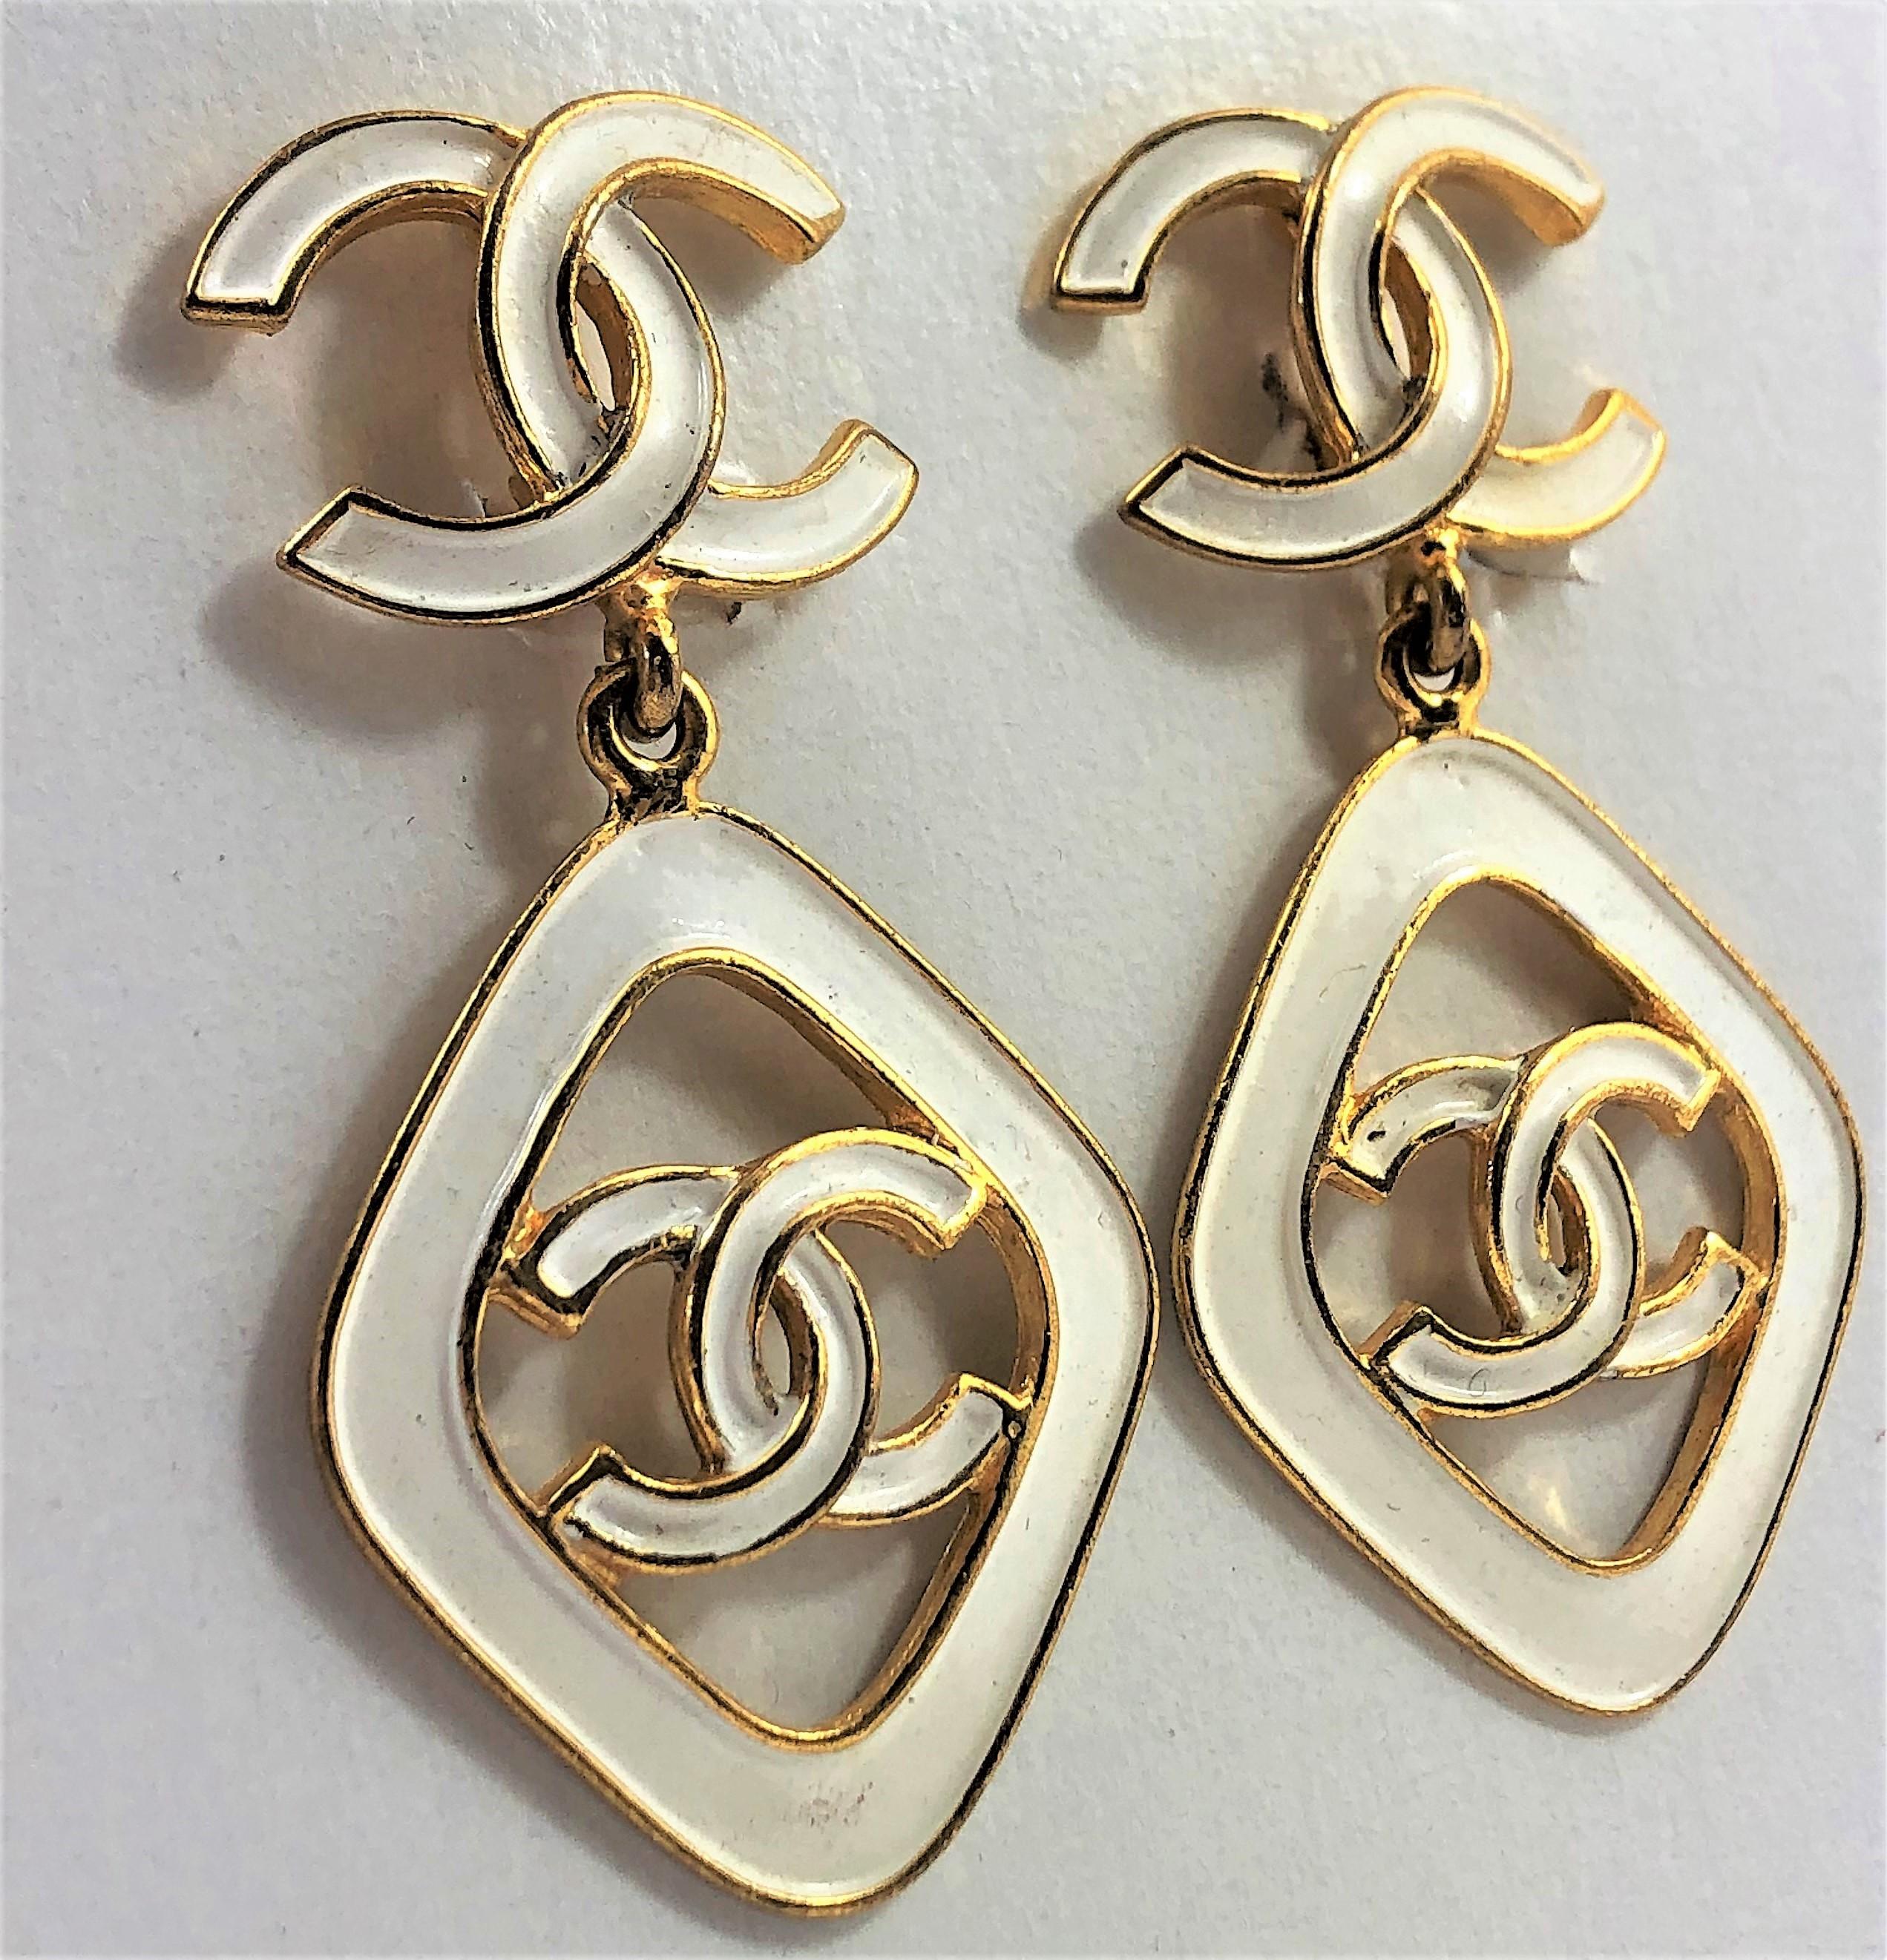 Great for summer! These lovely white enamel earrings have the CC logo both on
the top and bottom. Measuring 2.5 inches long by 1.25 inches across. Made in
1993 for the Cruise Collection. Marked Chanel 93 CC C Made In France.